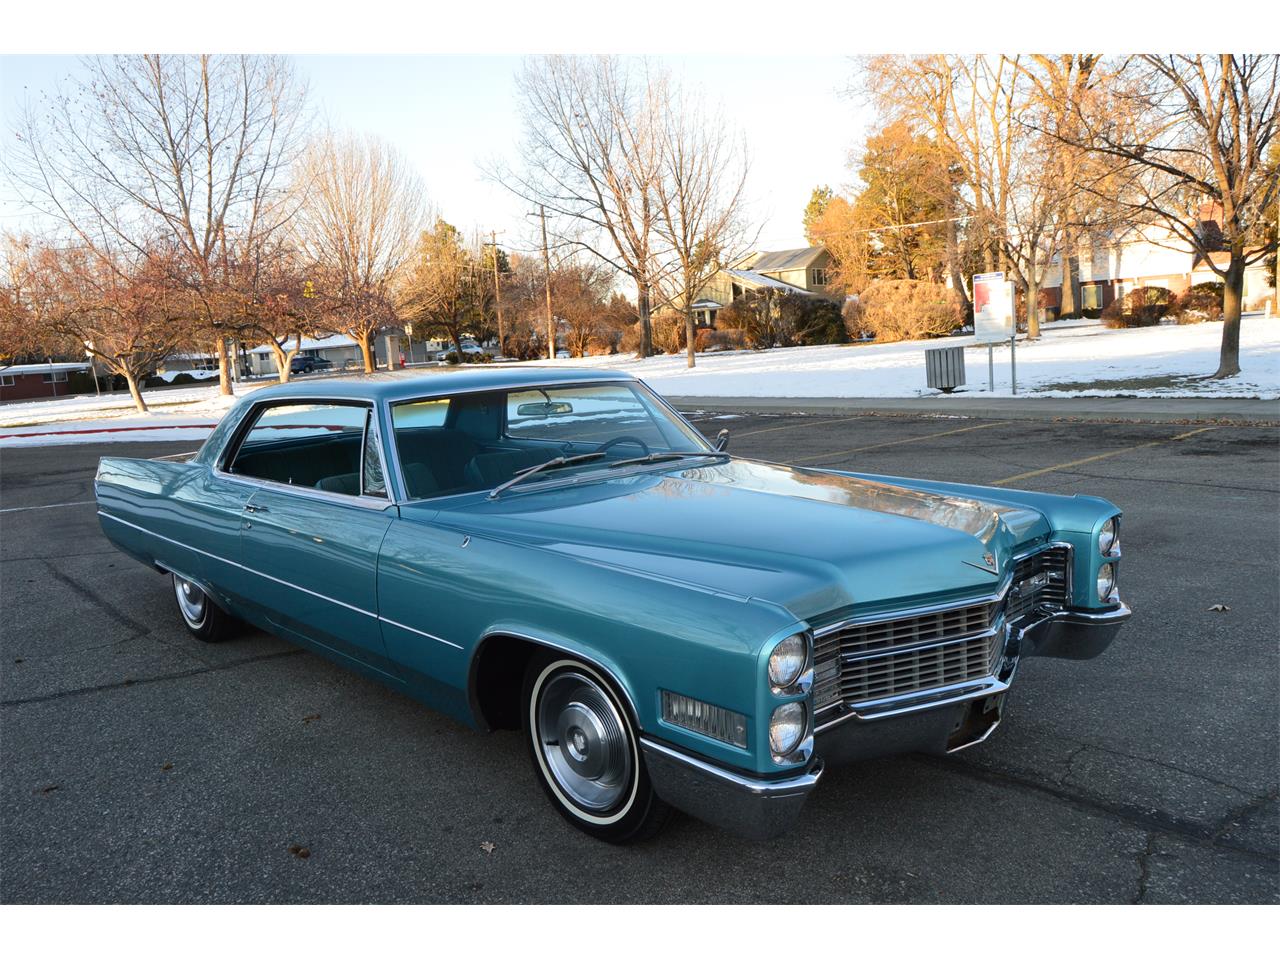 1966 cadillac coupe deville for sale classiccars com cc 1073784 1966 cadillac coupe deville for sale